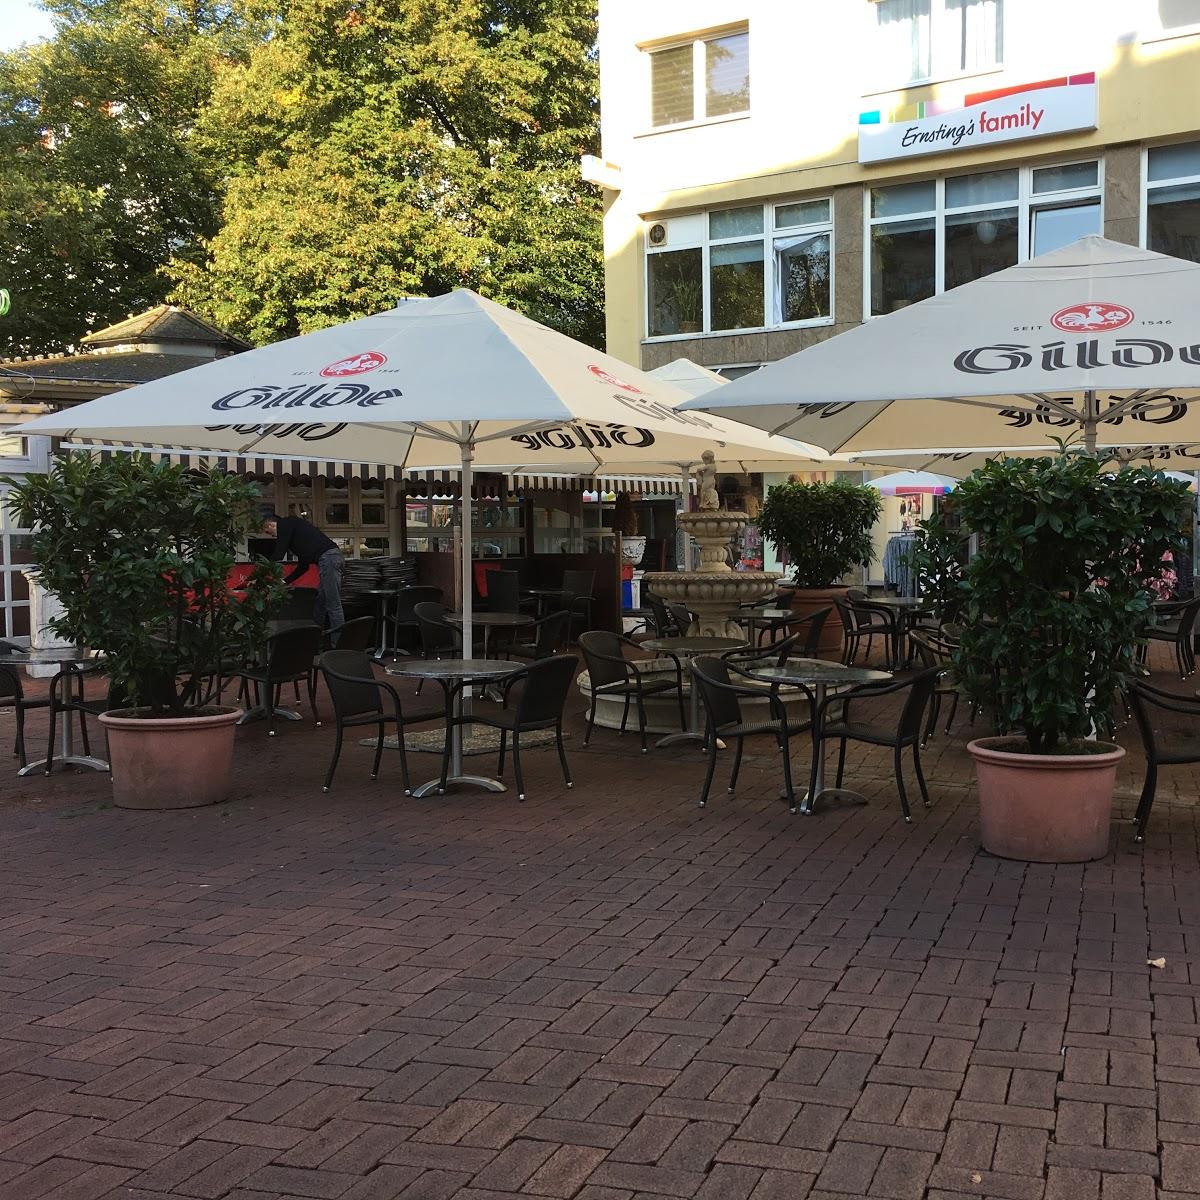 Restaurant "Piazza Cappuccino" in Hannover